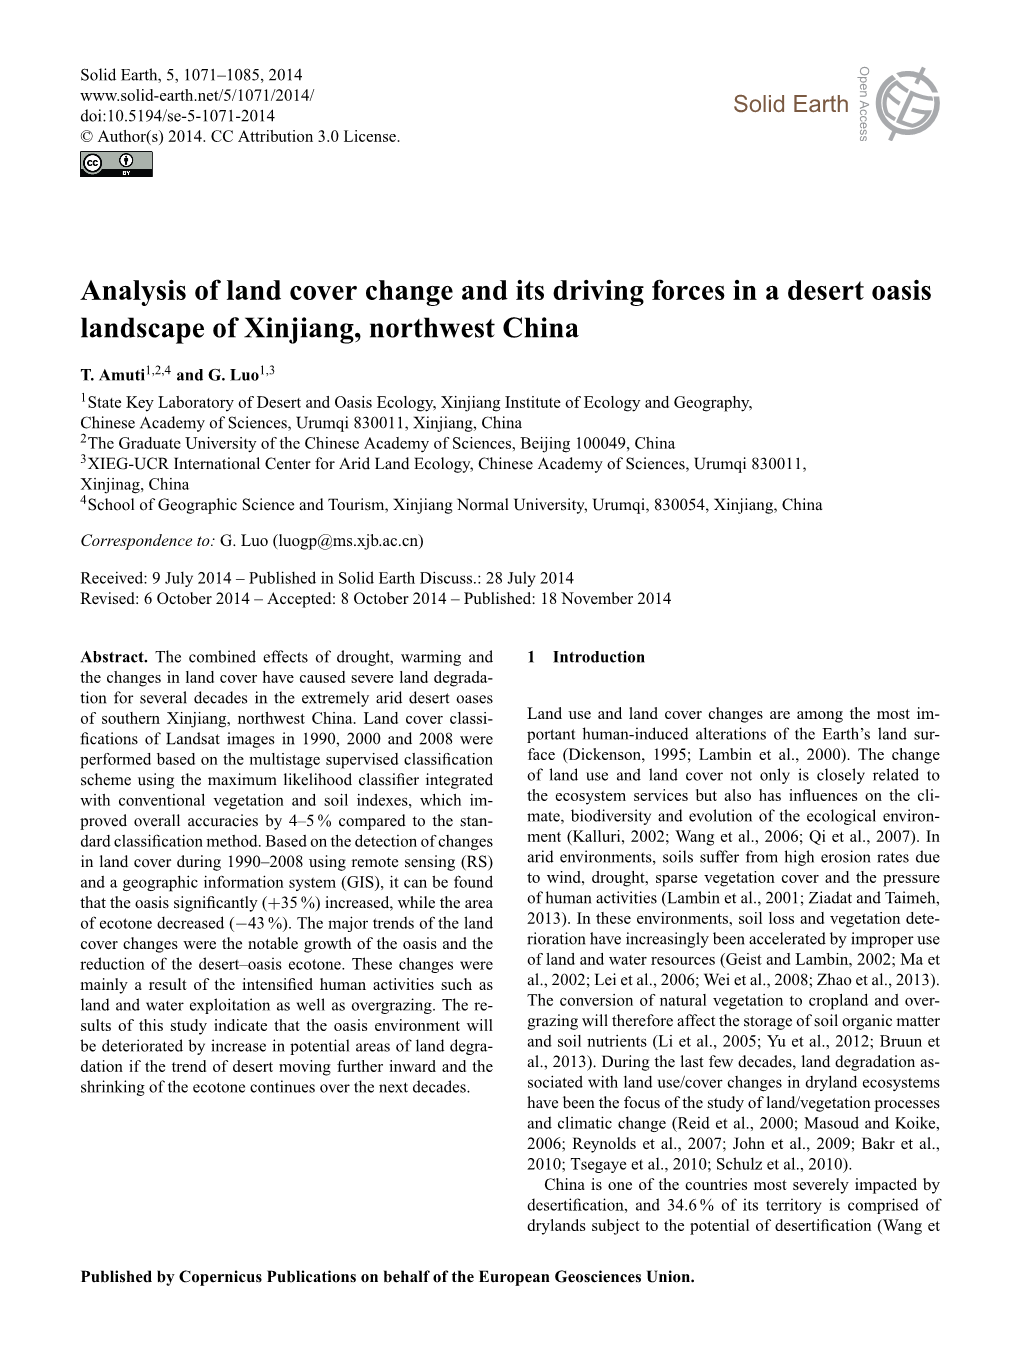 Analysis of Land Cover Change and Its Driving Forces in a Desert Oasis Landscape of Xinjiang, Northwest China